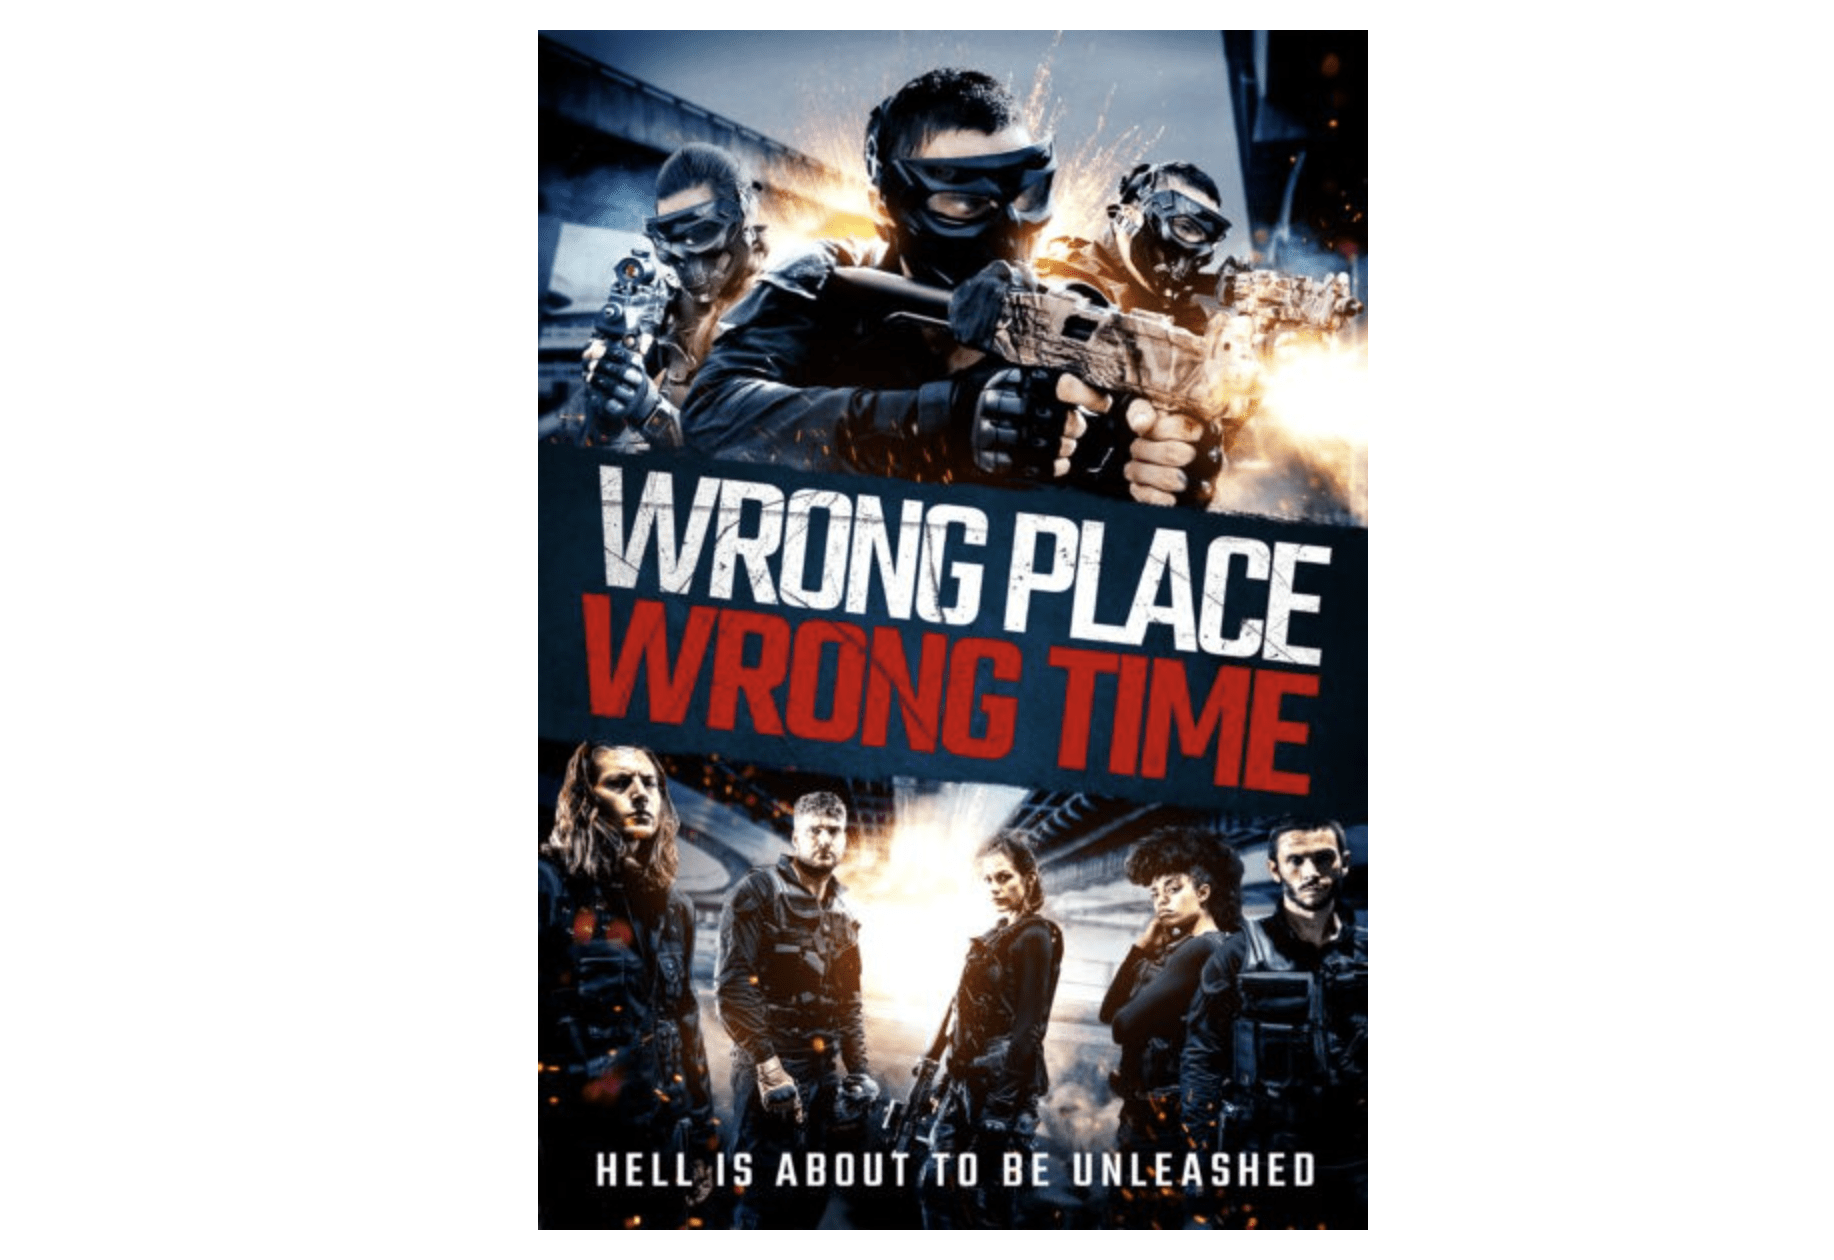 Watch The Trailer For Wrong Place Wrong Time Available On Demand And Dvd On May 4th 2747